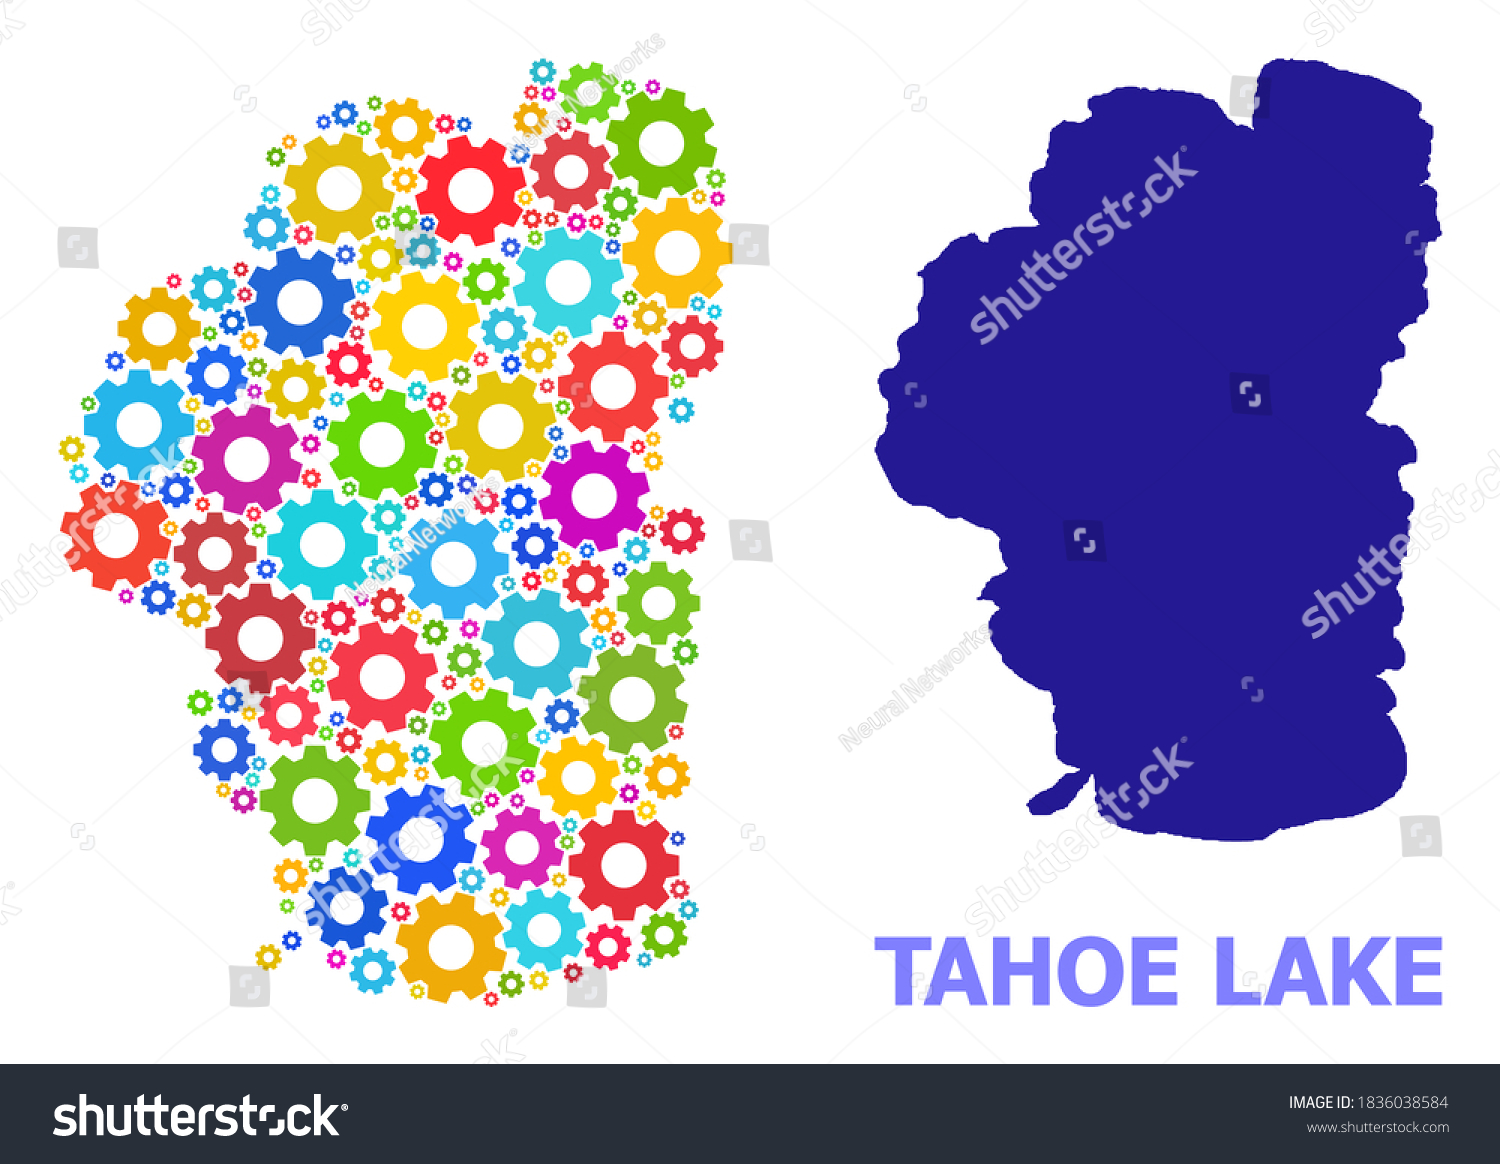 SVG of Vector collage map of Tahoe Lake done for engineering. Mosaic map of Tahoe Lake is shaped of random bright gear wheels. Engineering components in bright colors. svg